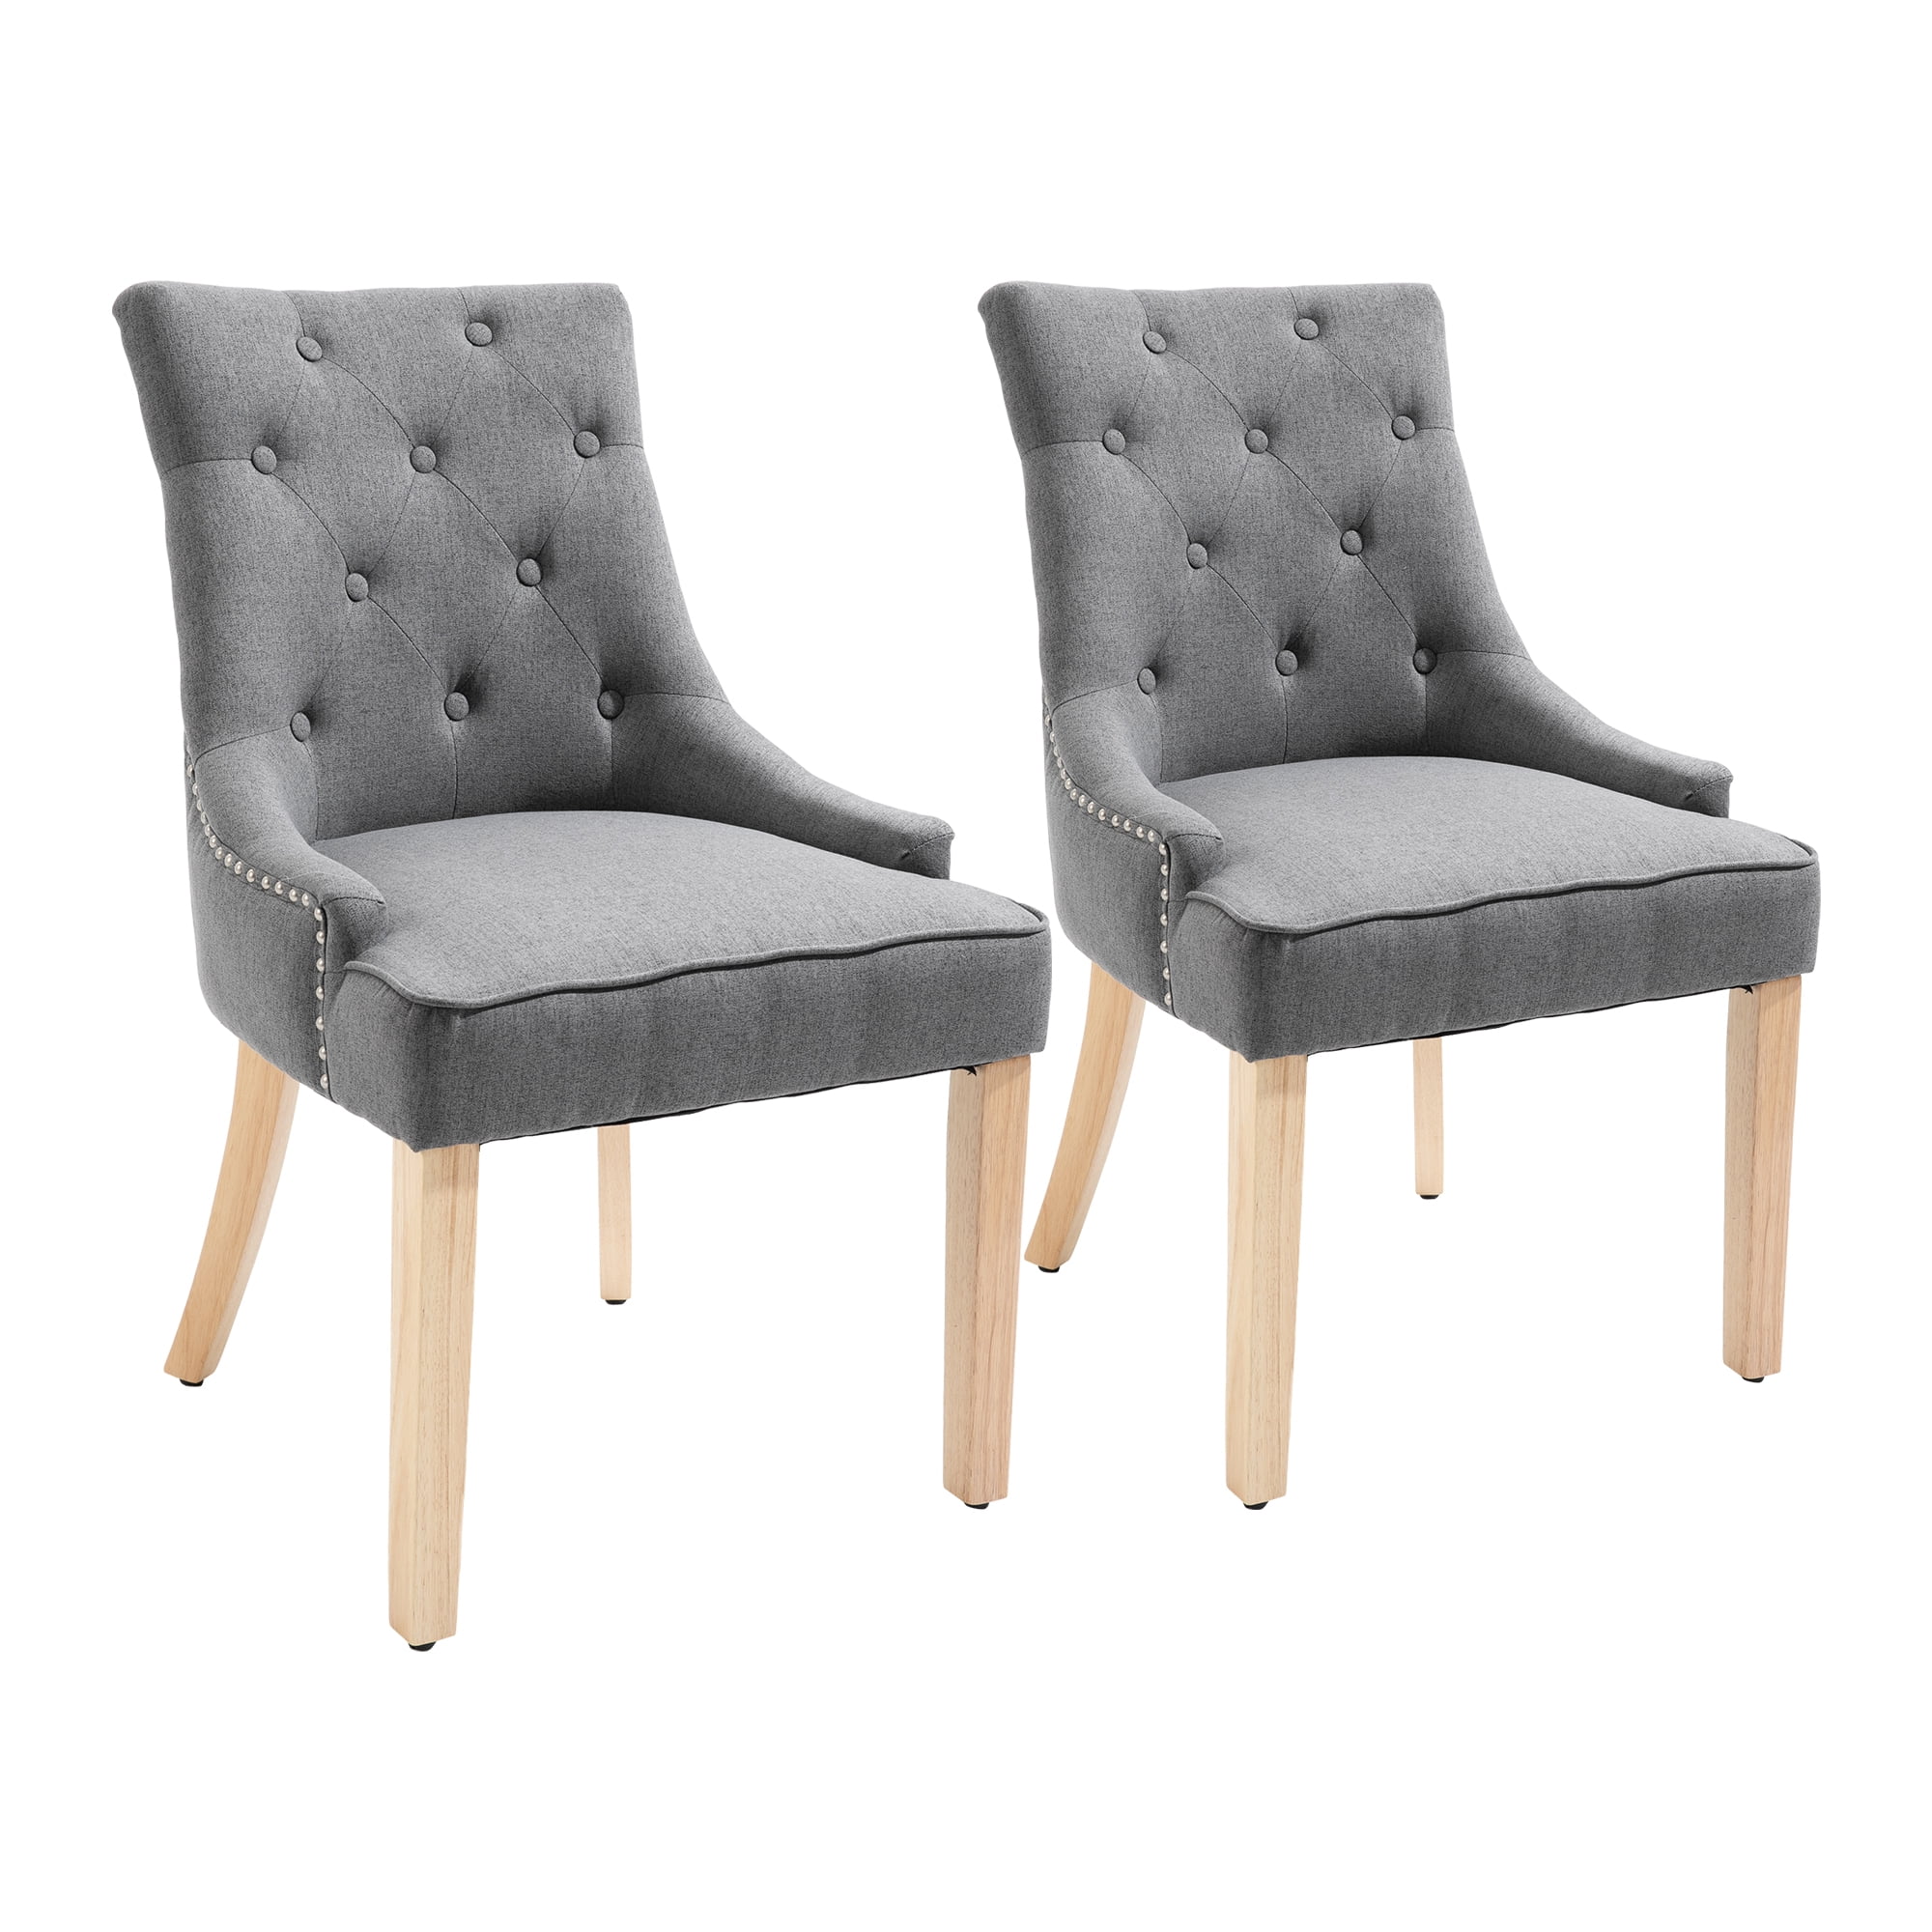 Grey HOMCOM Modern Dining Chairs Upholstered Linen-Touch Fabric Armless Accent Chairs Set of 2 with Steel Legs